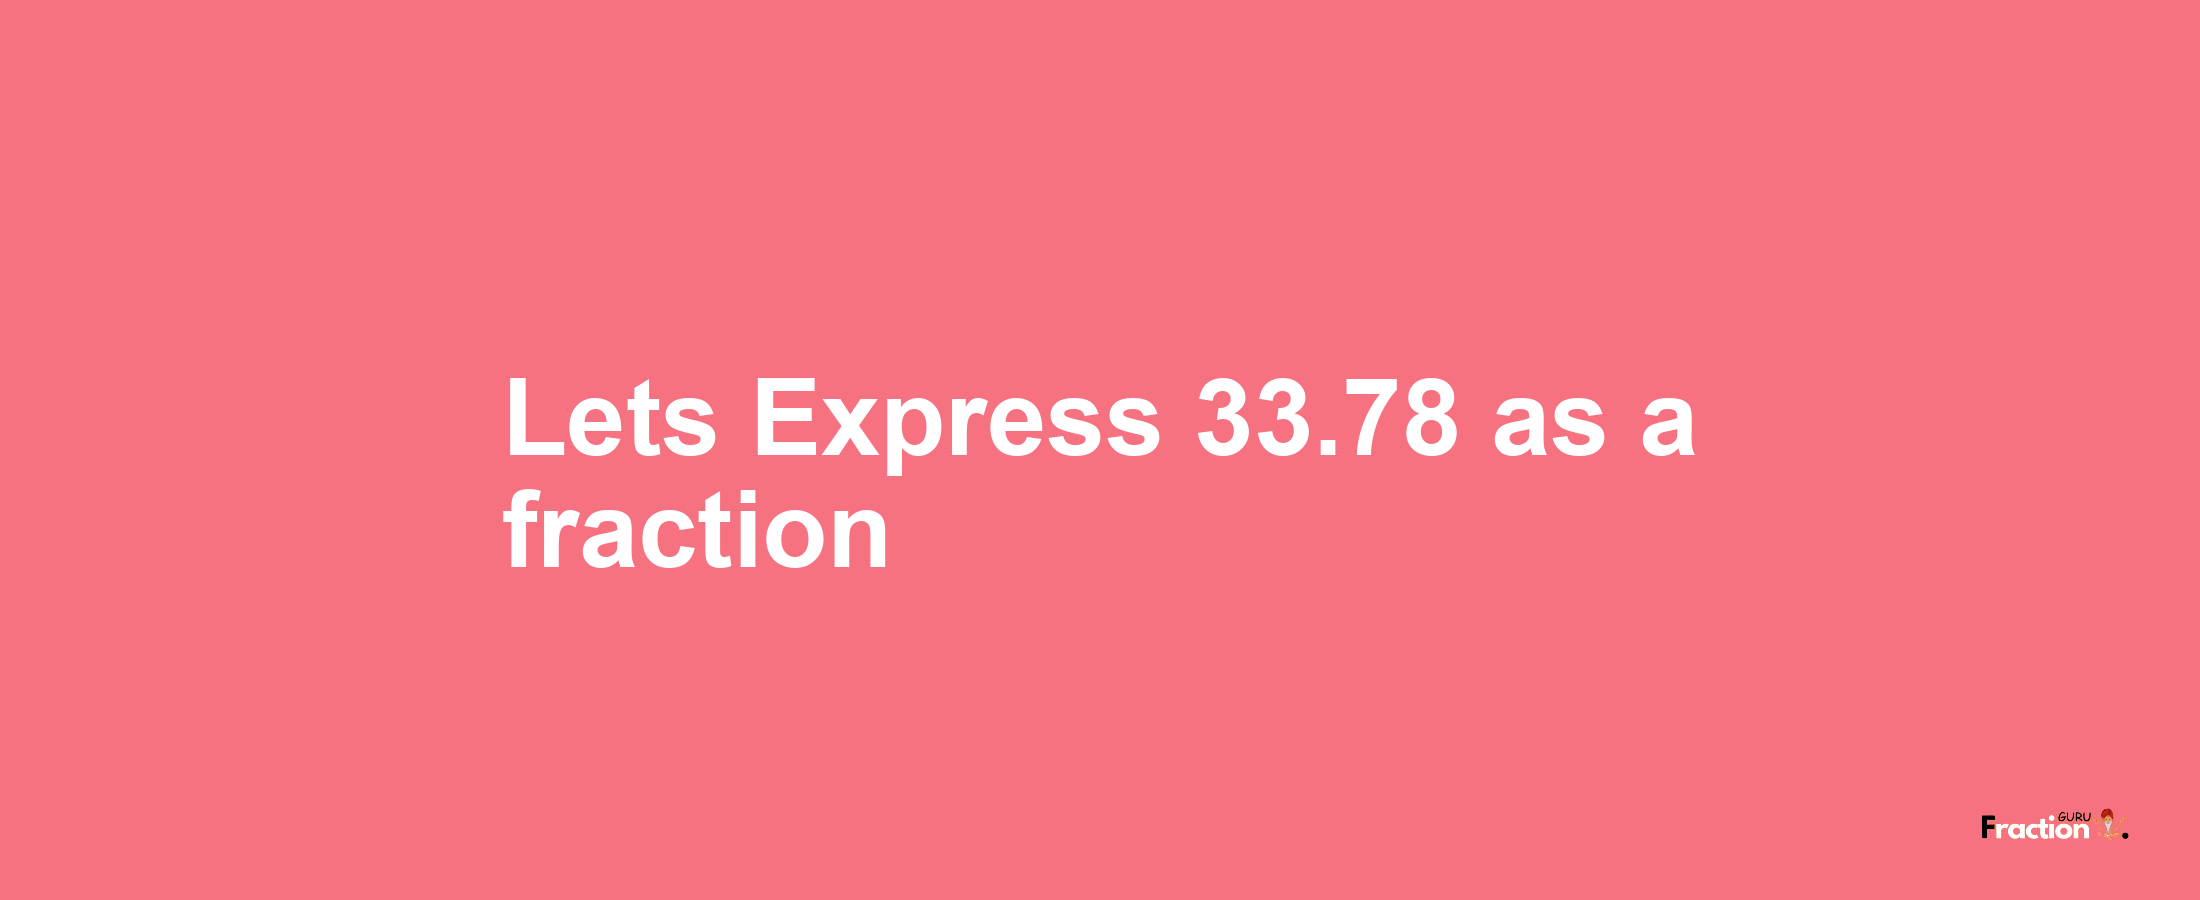 Lets Express 33.78 as afraction